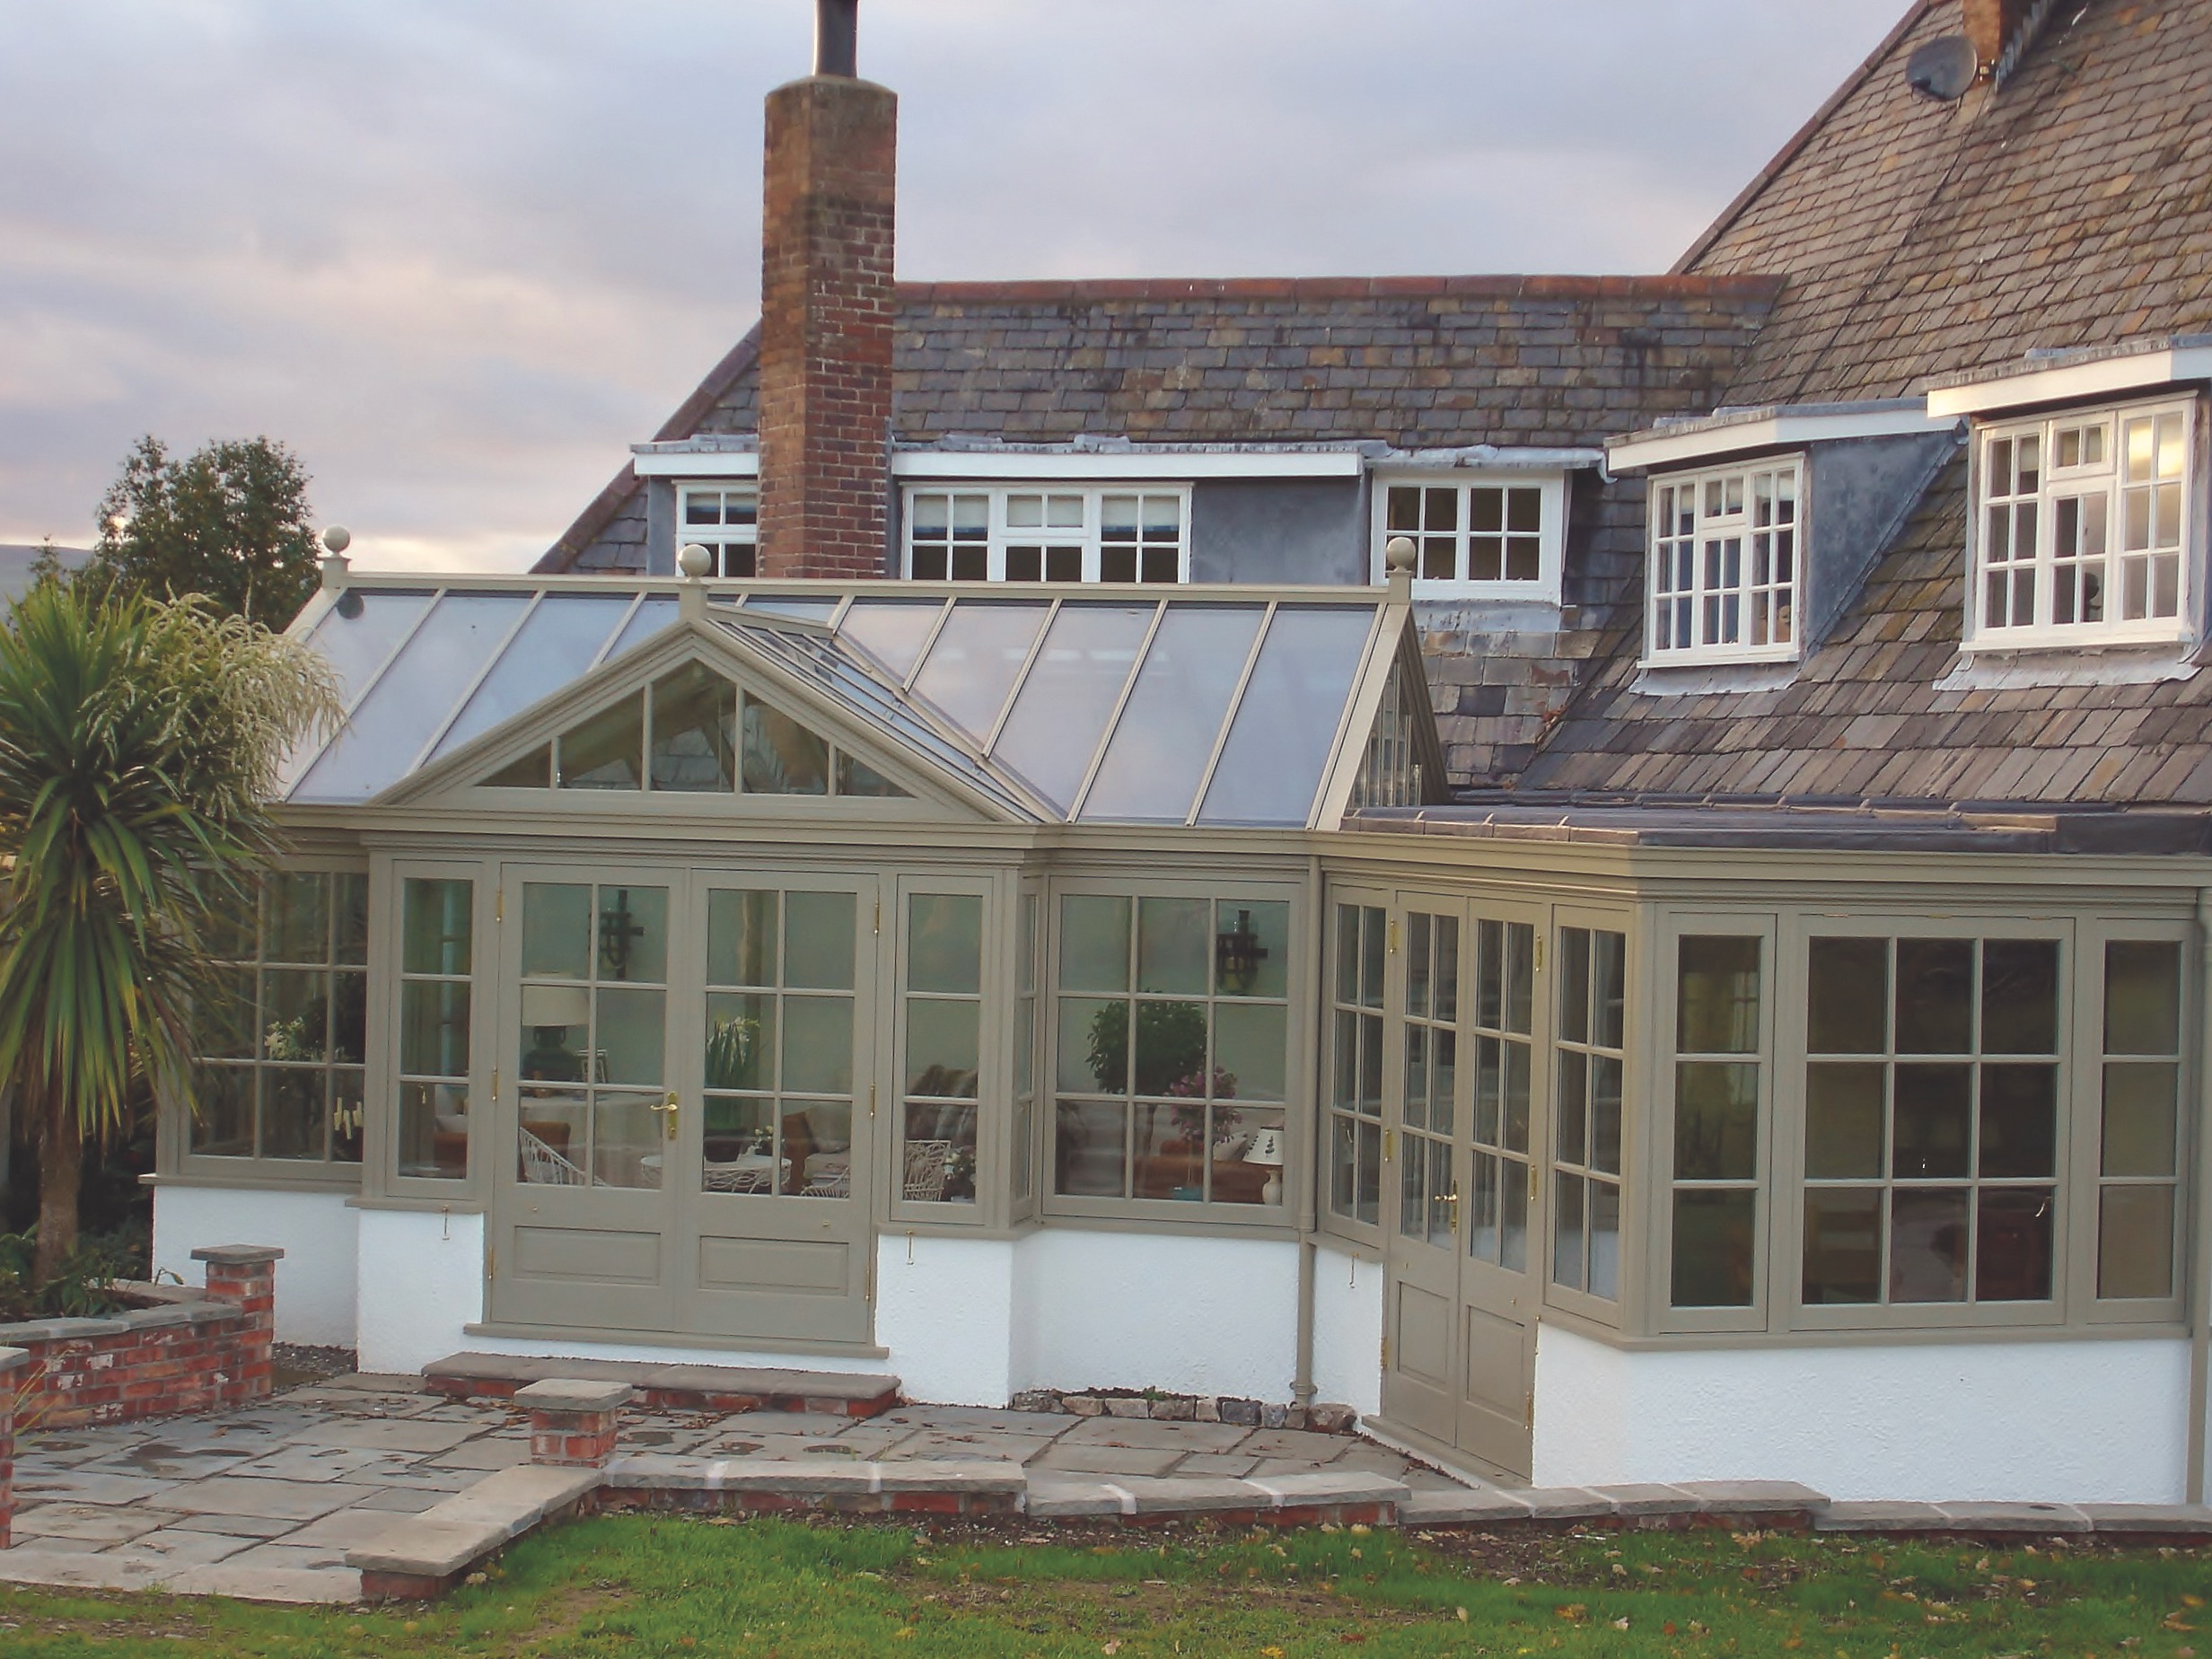 Wrap-around conservatory with double doors in sage green